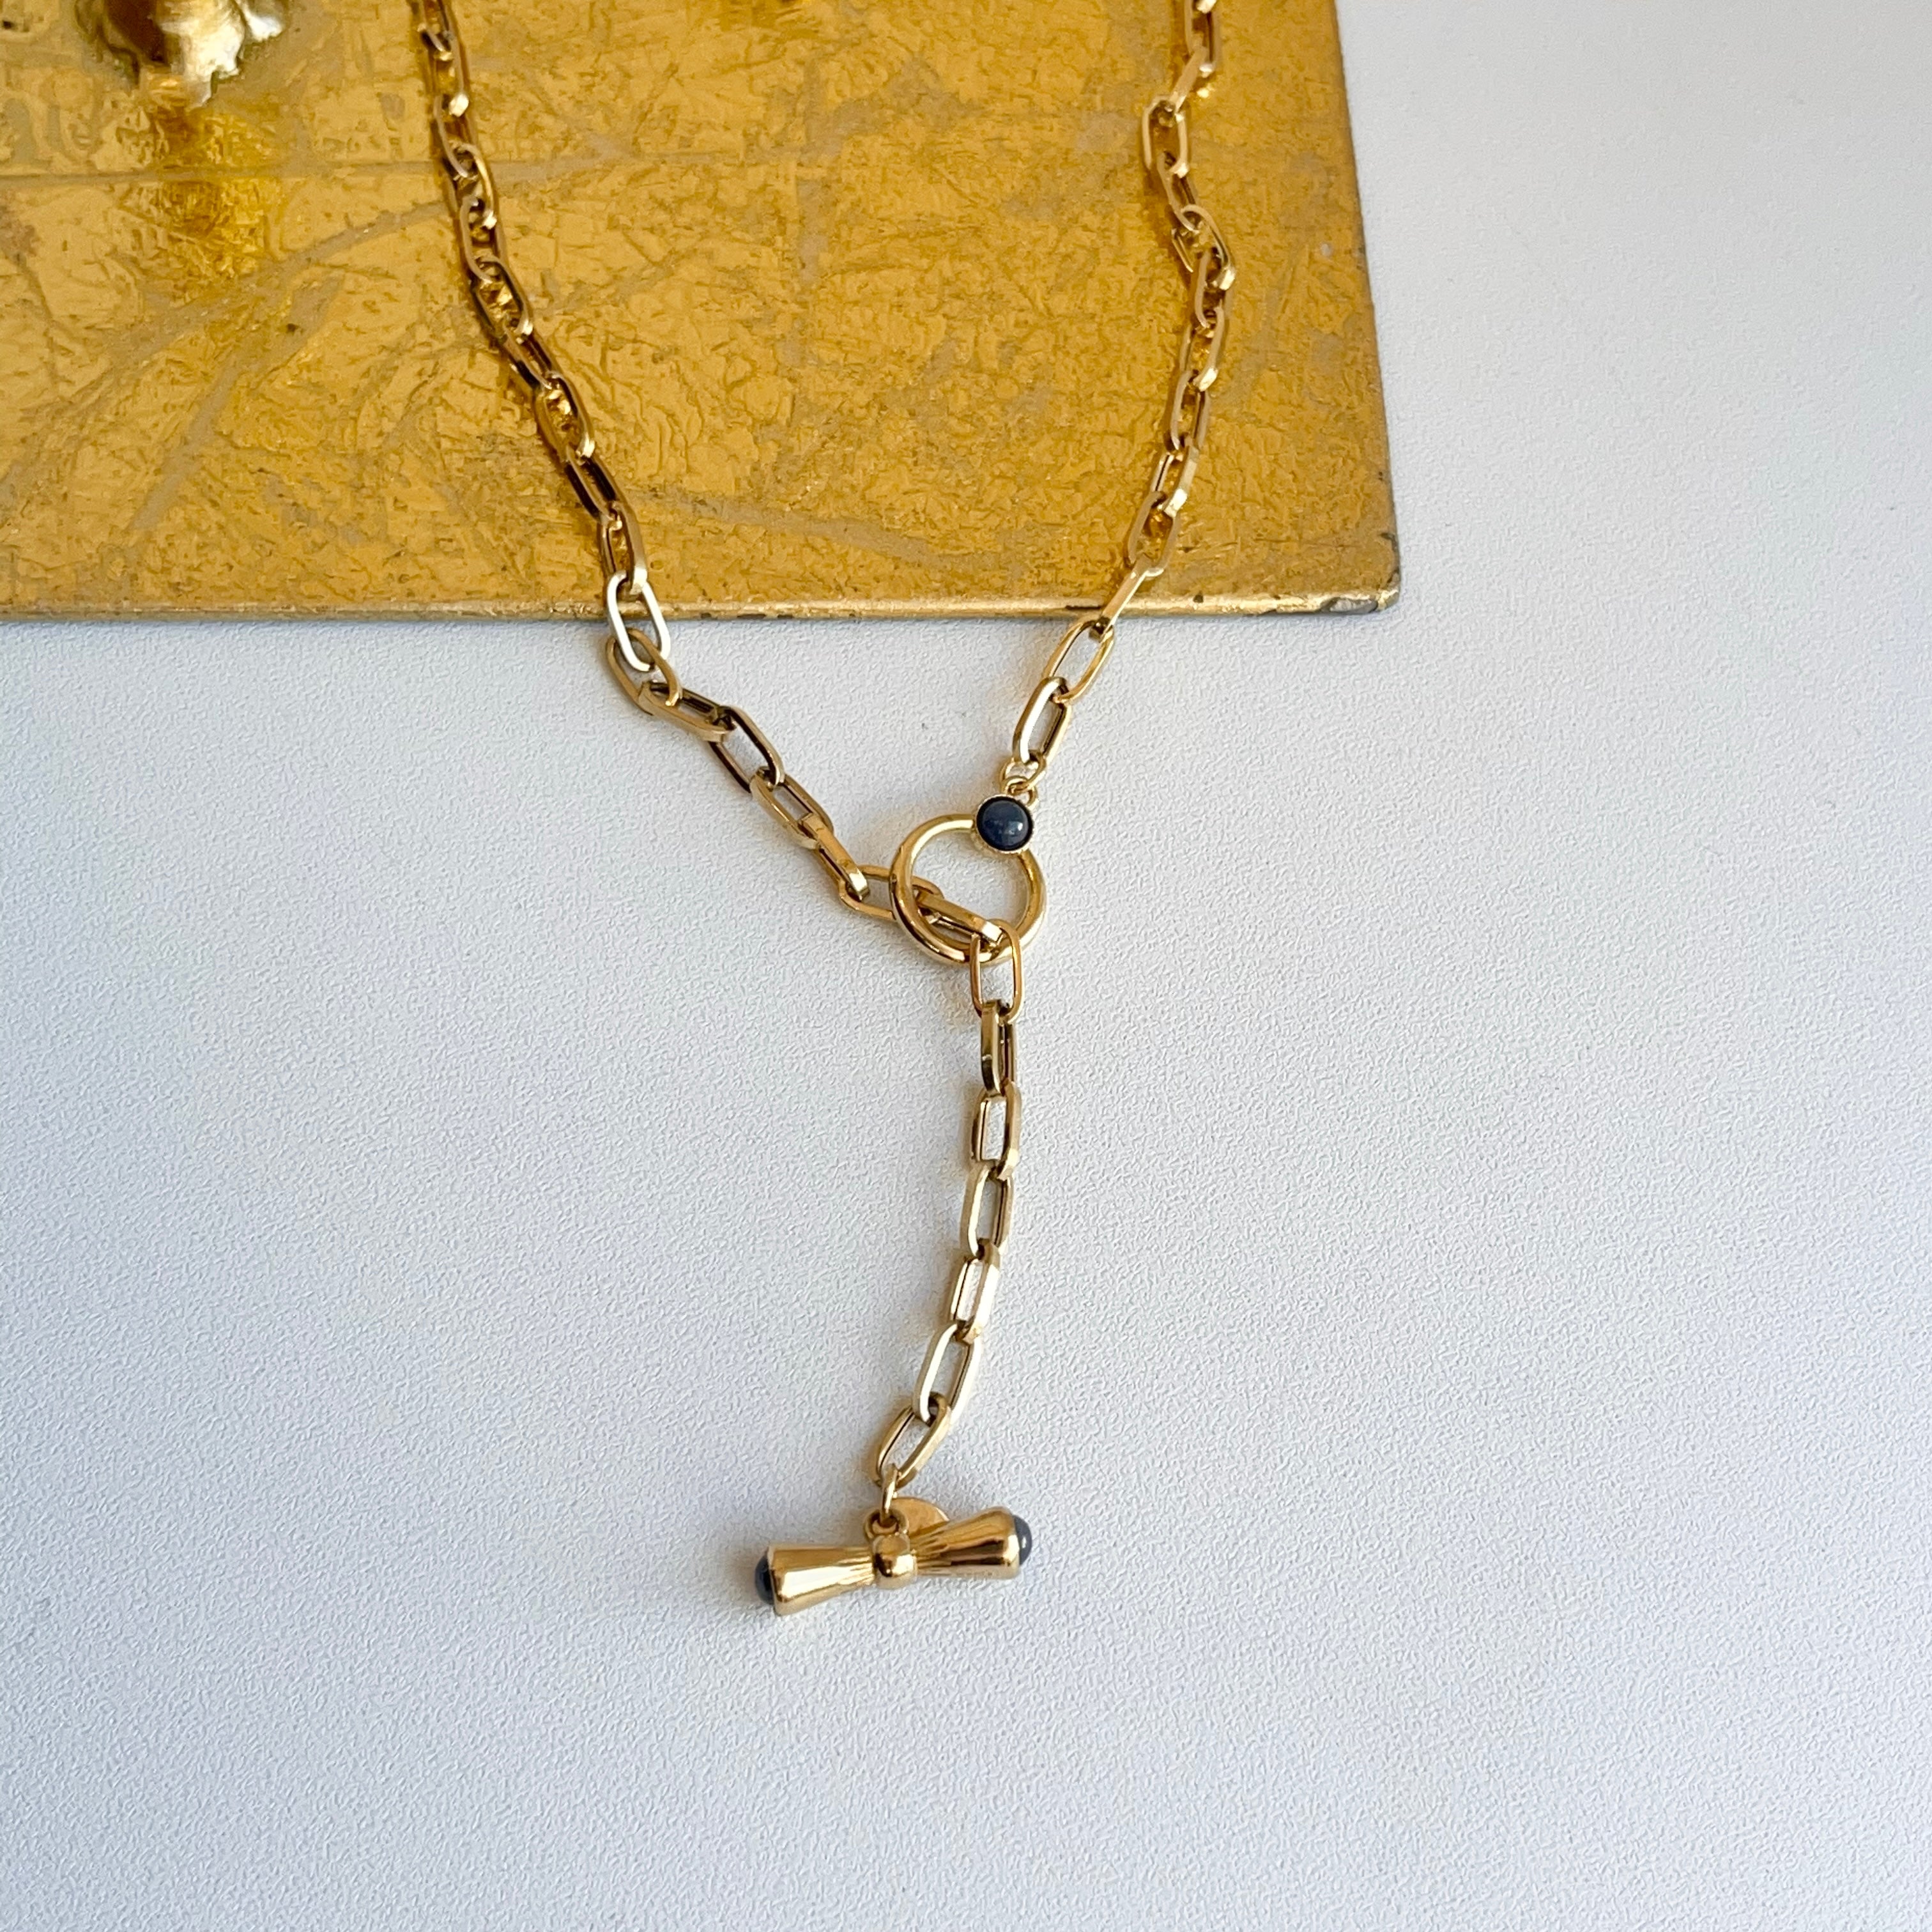 By Adina Eden 14k Gold Paperclip Medallion Lariat Necklace | Anthropologie  Singapore - Women's Clothing, Accessories & Home